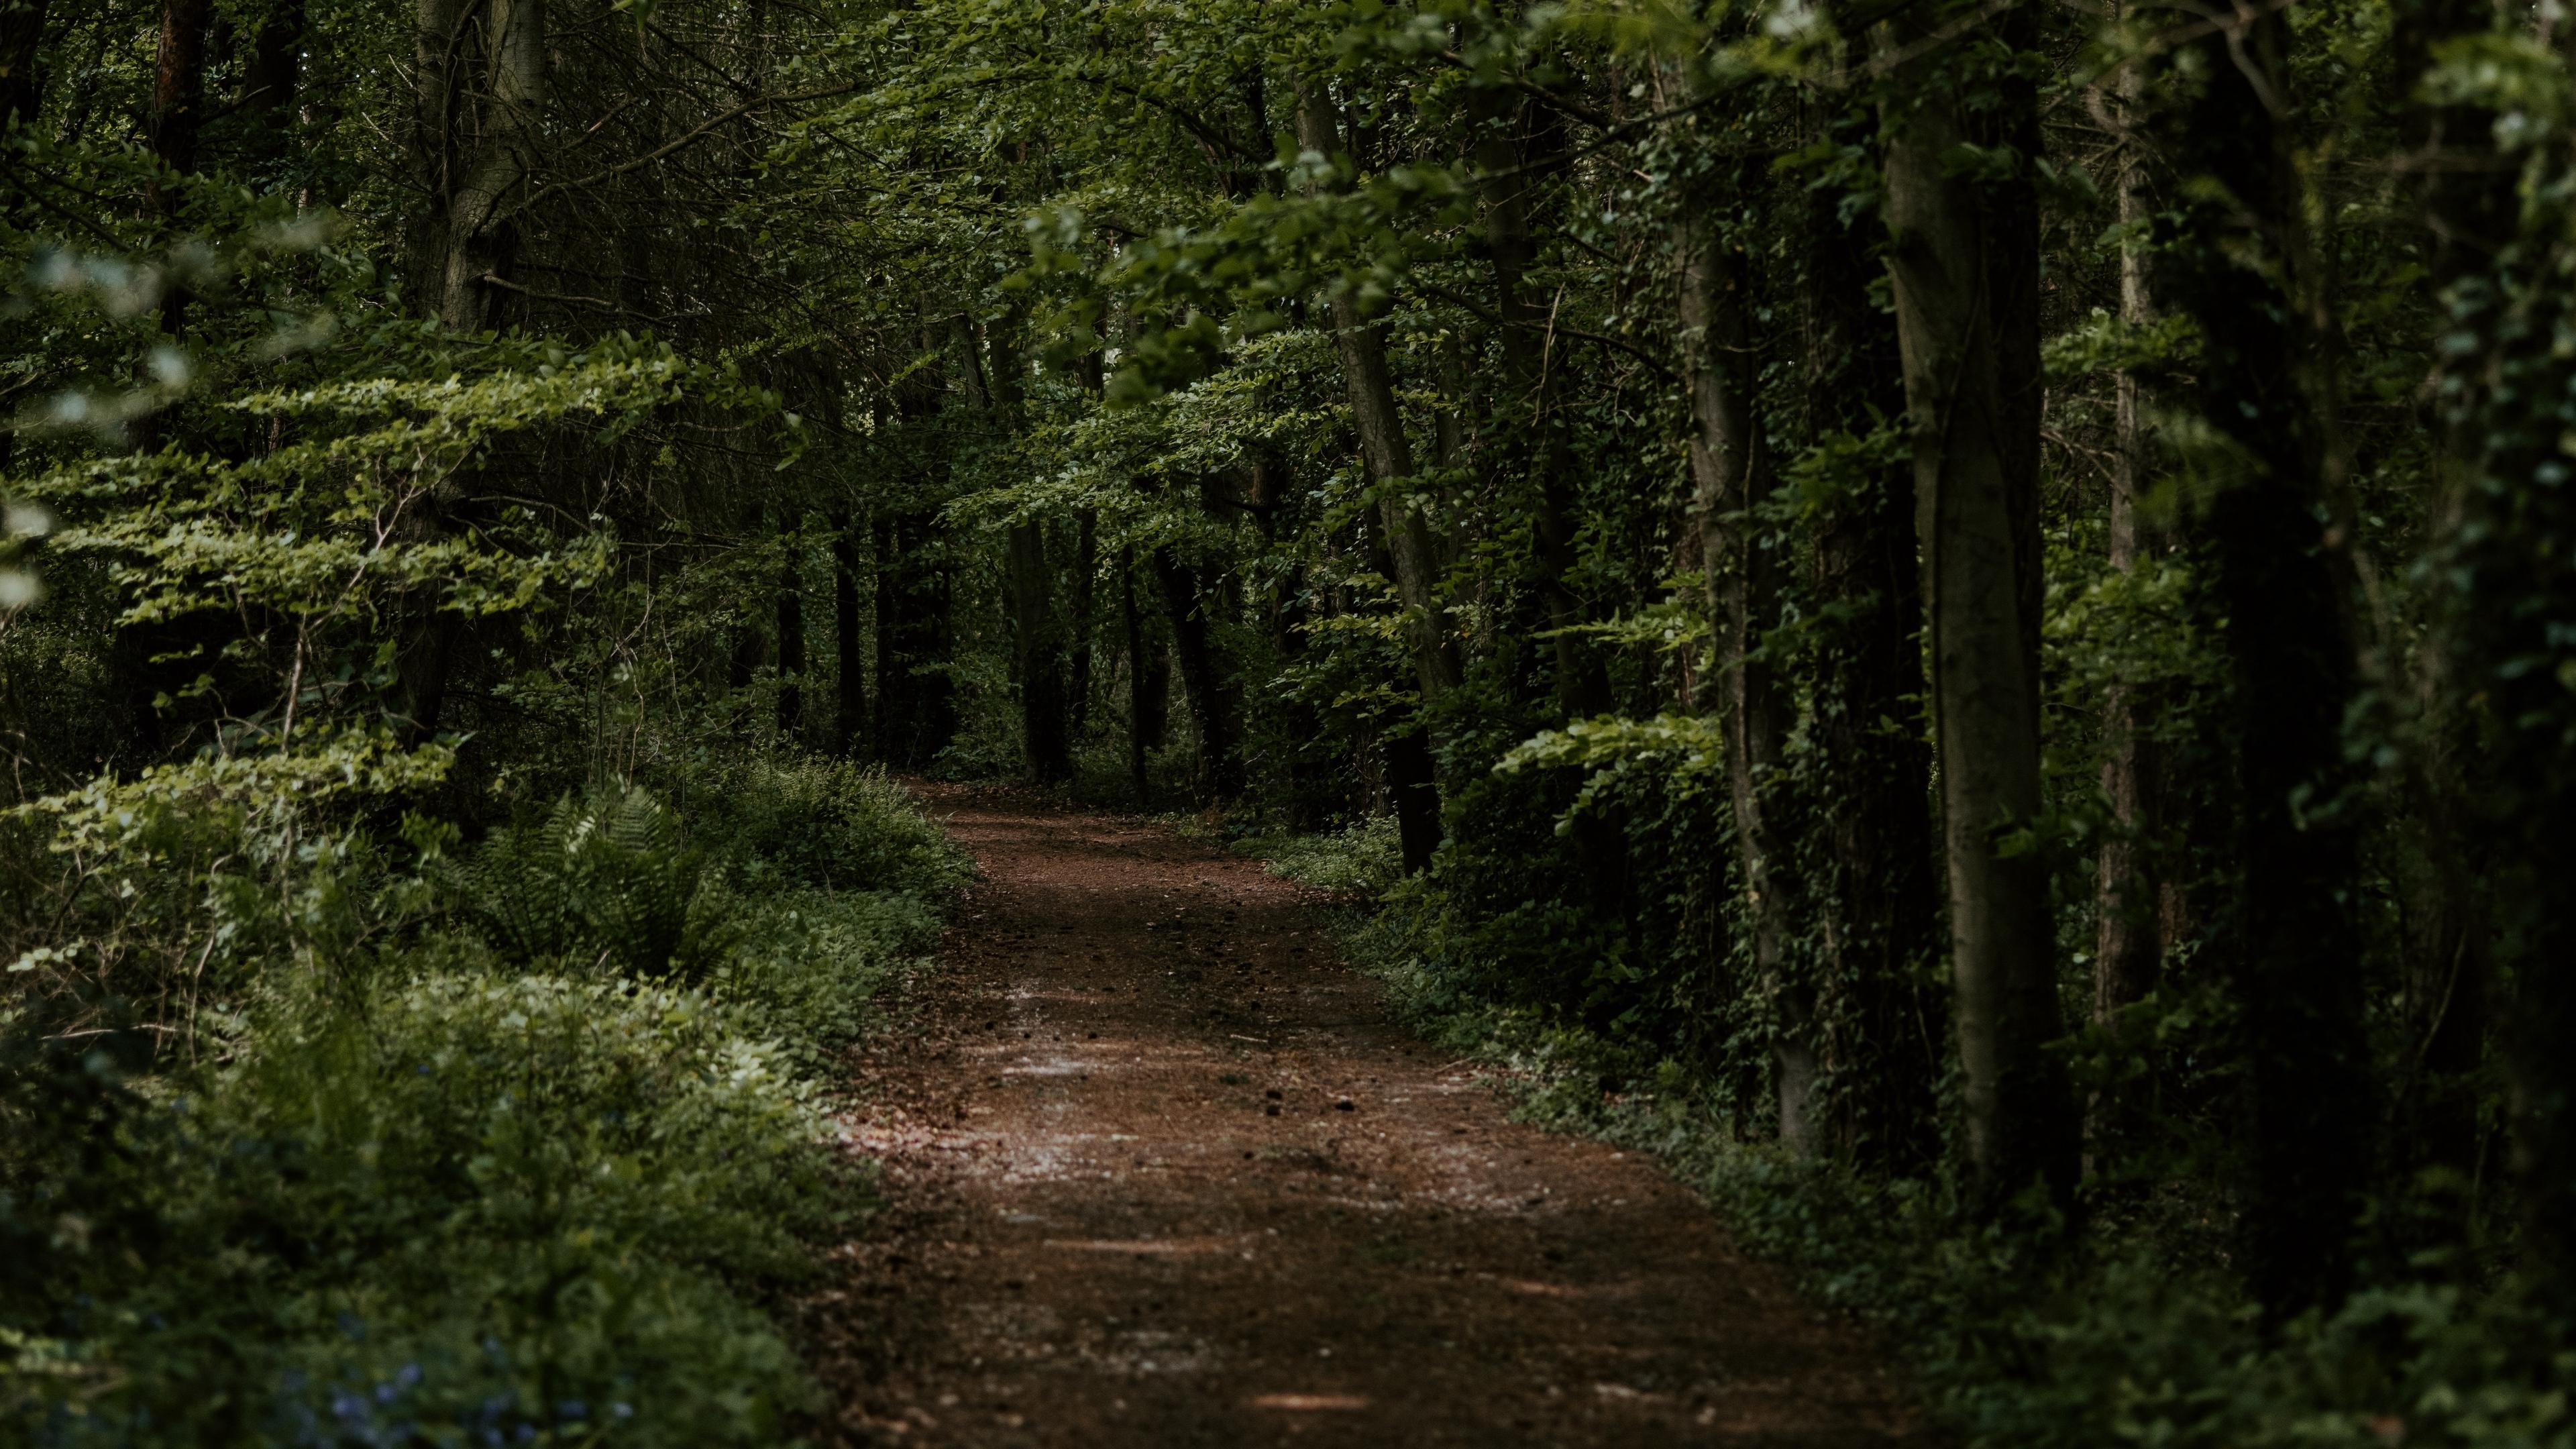 Download wallpaper 3840x2160 forest, trees, trail, turn